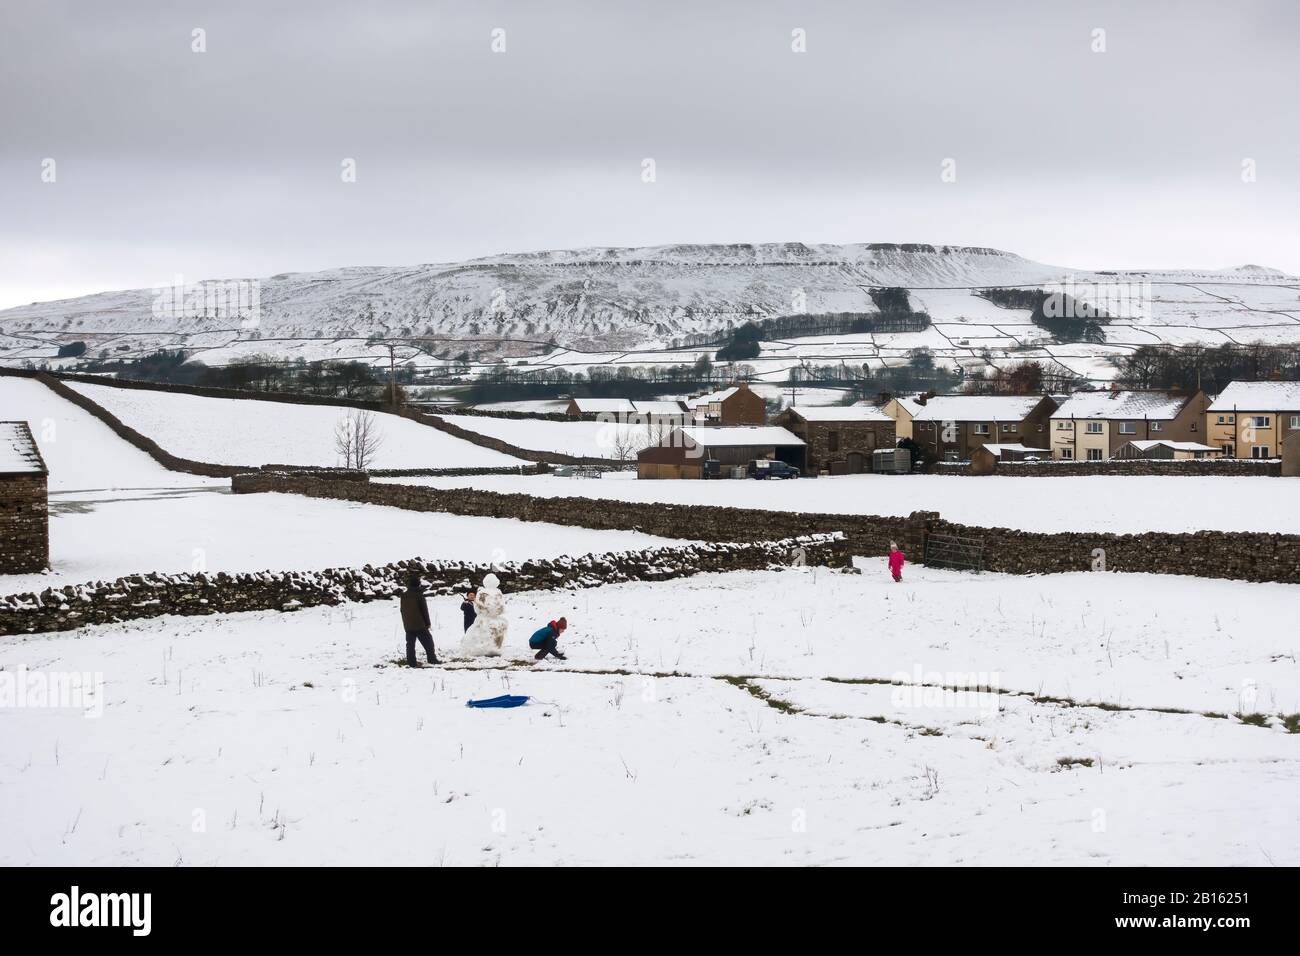 Giorno di neve a Gayle, Wensleydale, Yorkshire Dales Foto Stock